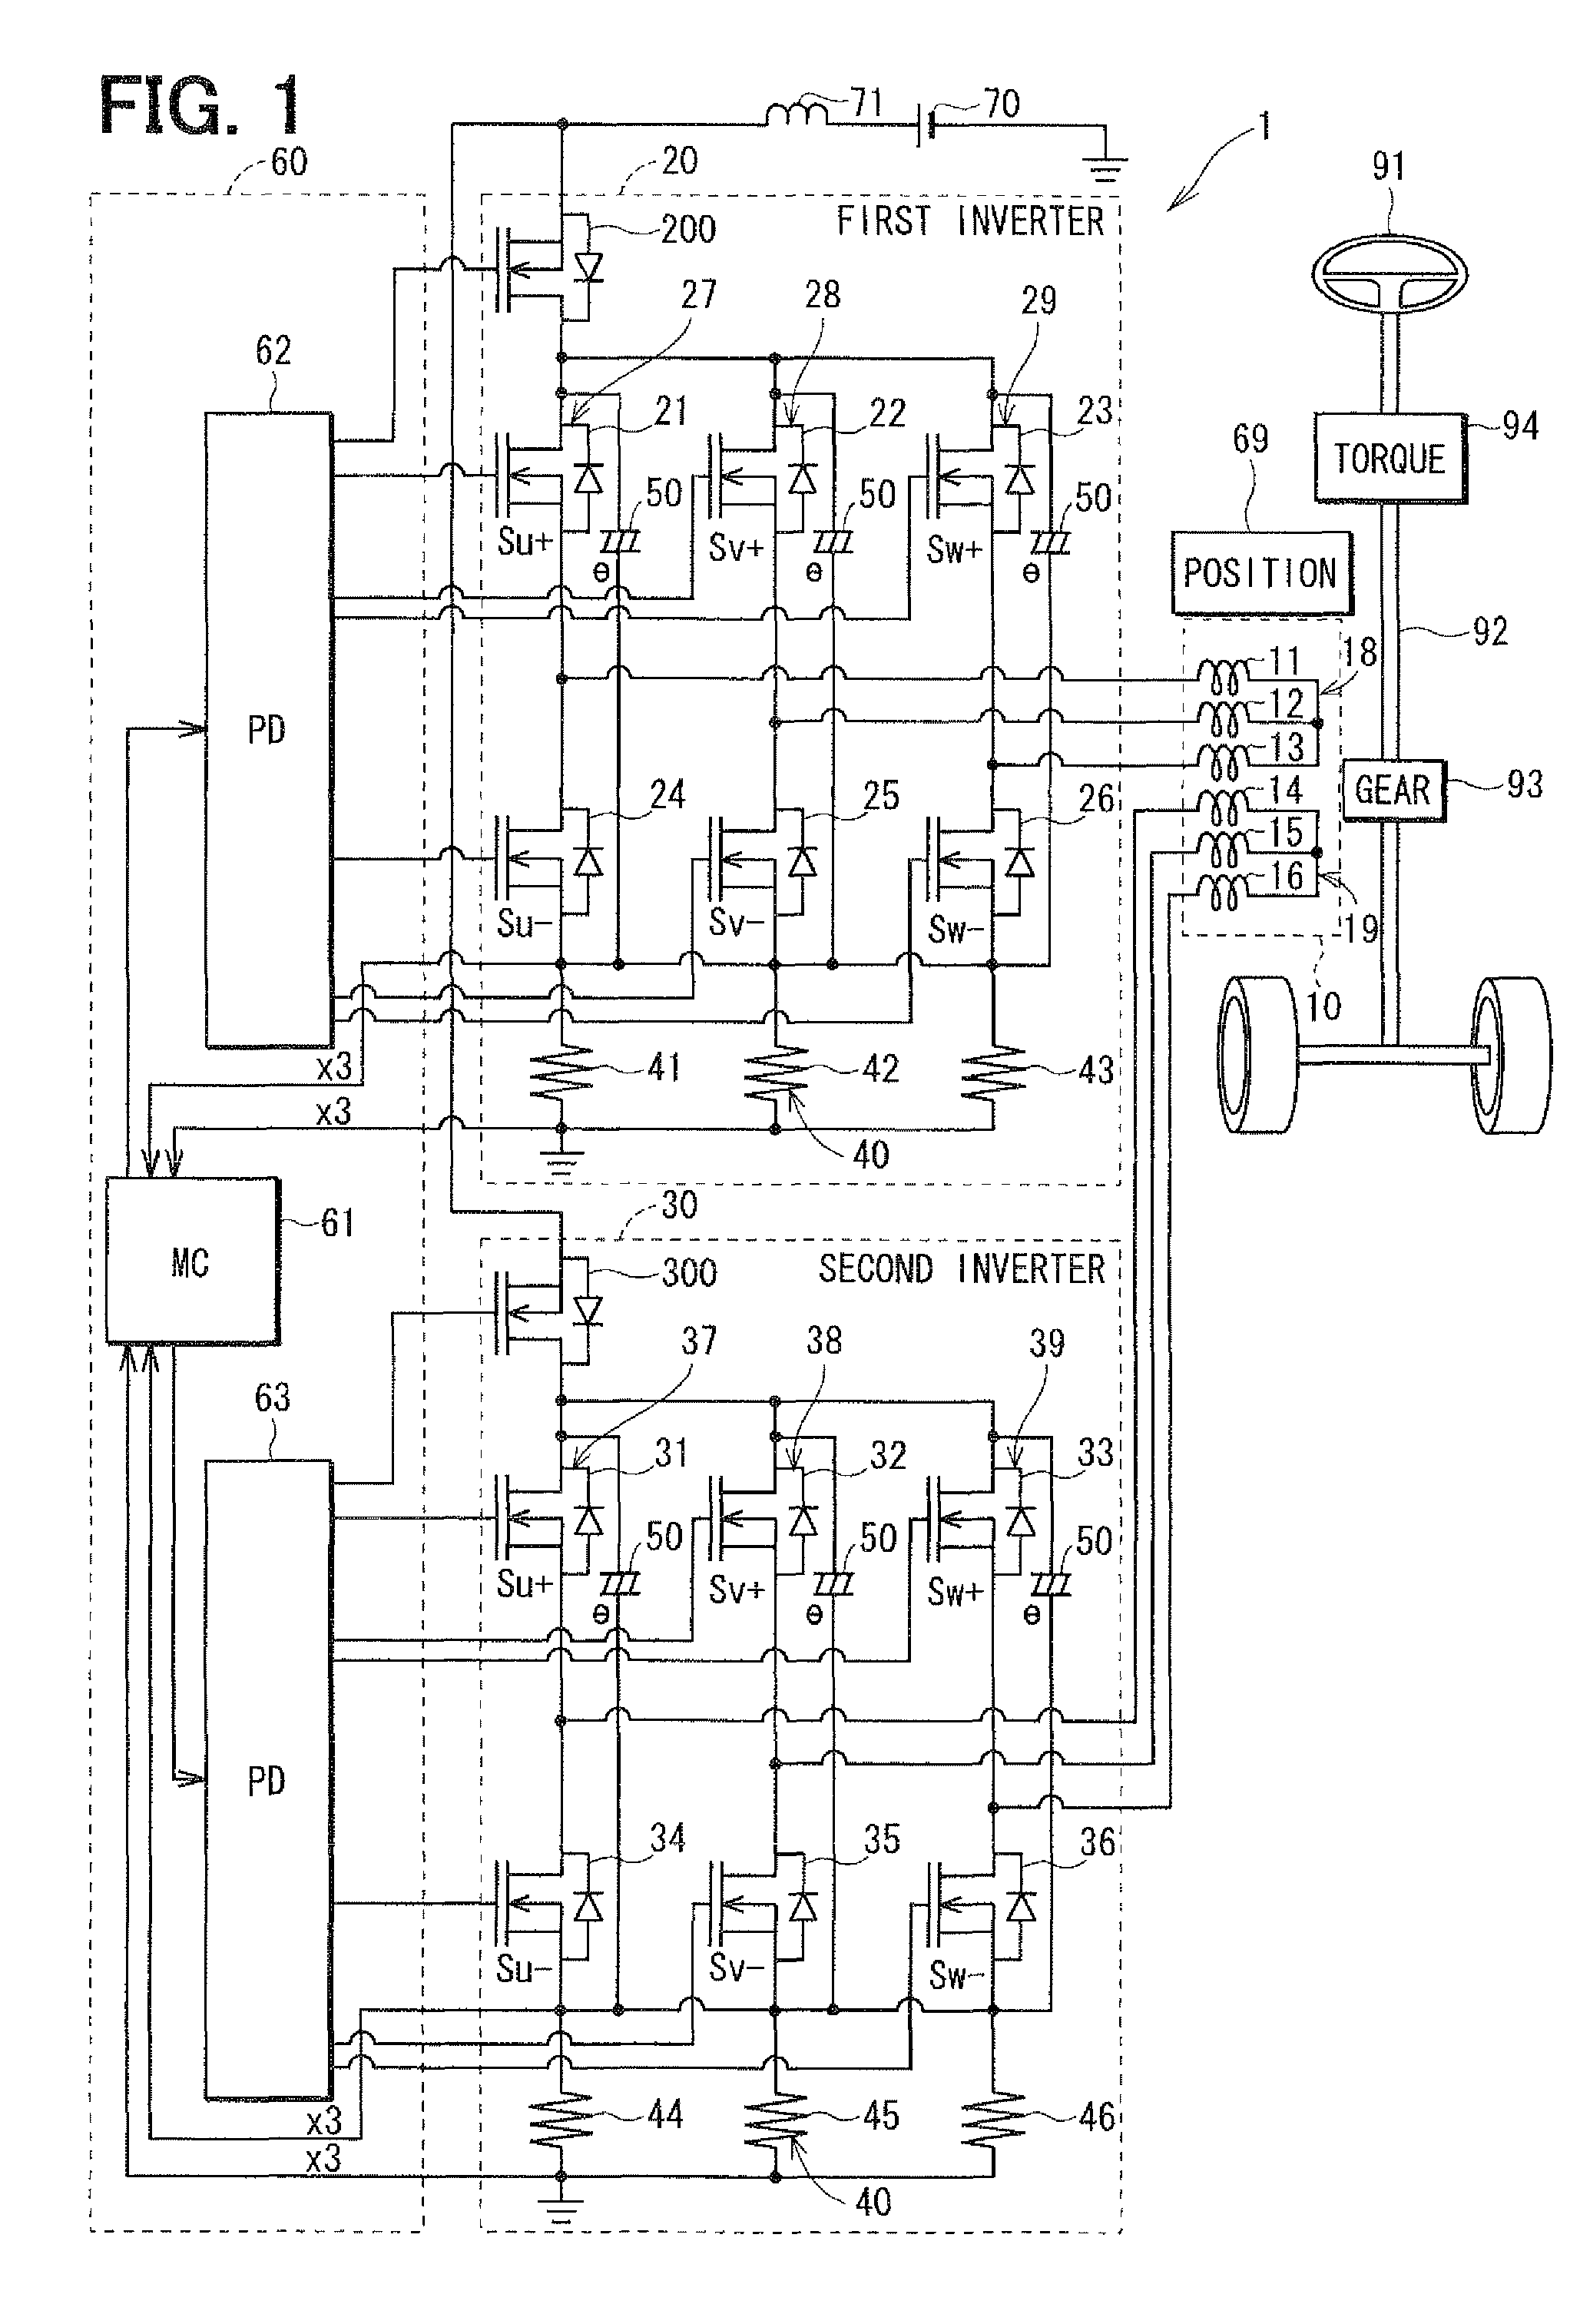 Multi-phase rotary machine control apparatus and electric power steering system using the same